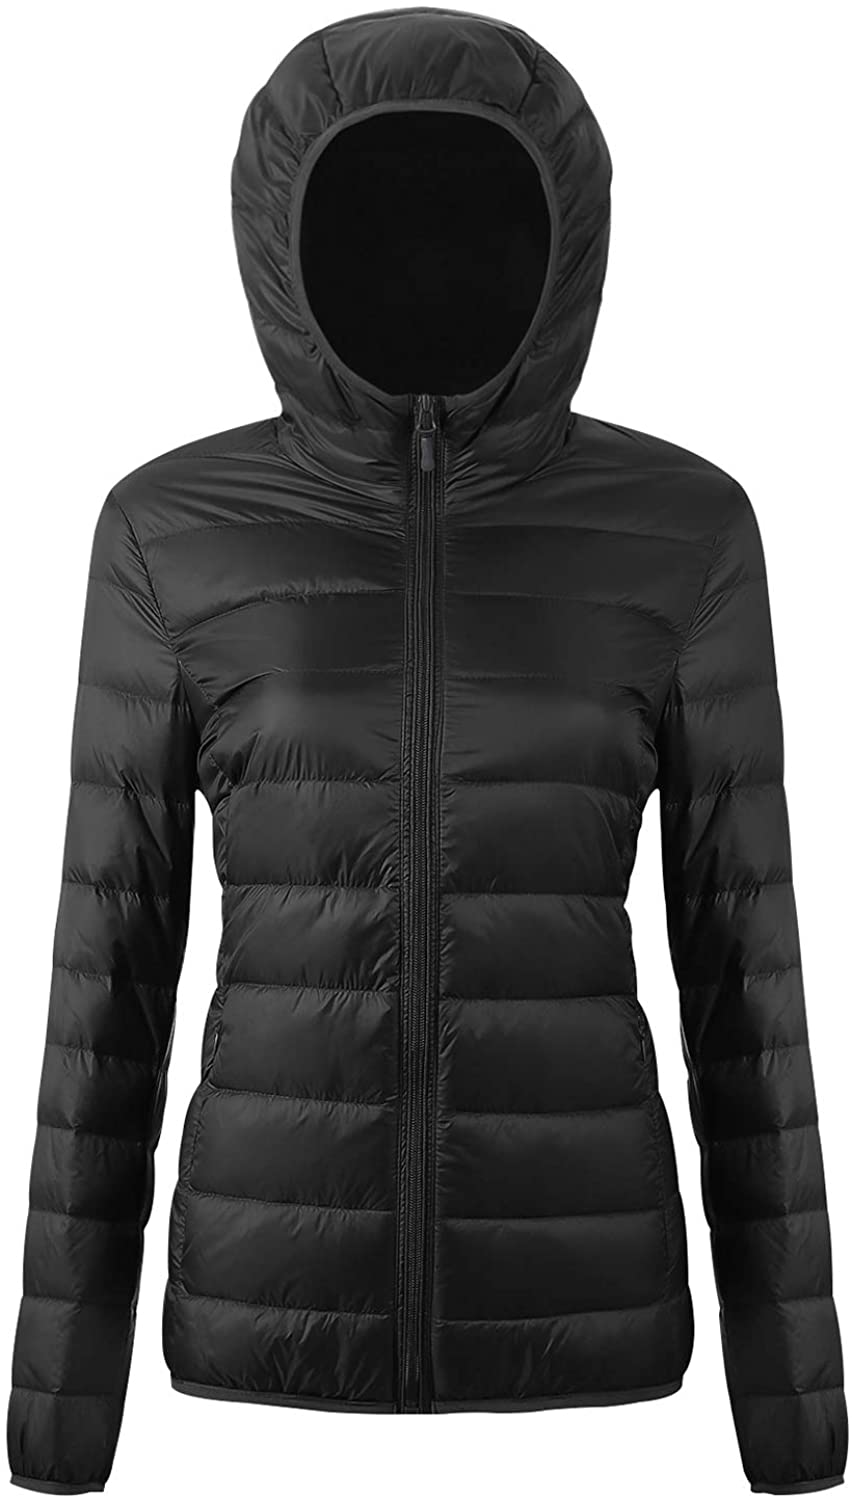 Women's Hooded Packable Down Jacket Ultra Light Weight Short Puffer Coat with Travel Bag Black - Home Decor Gifts and More